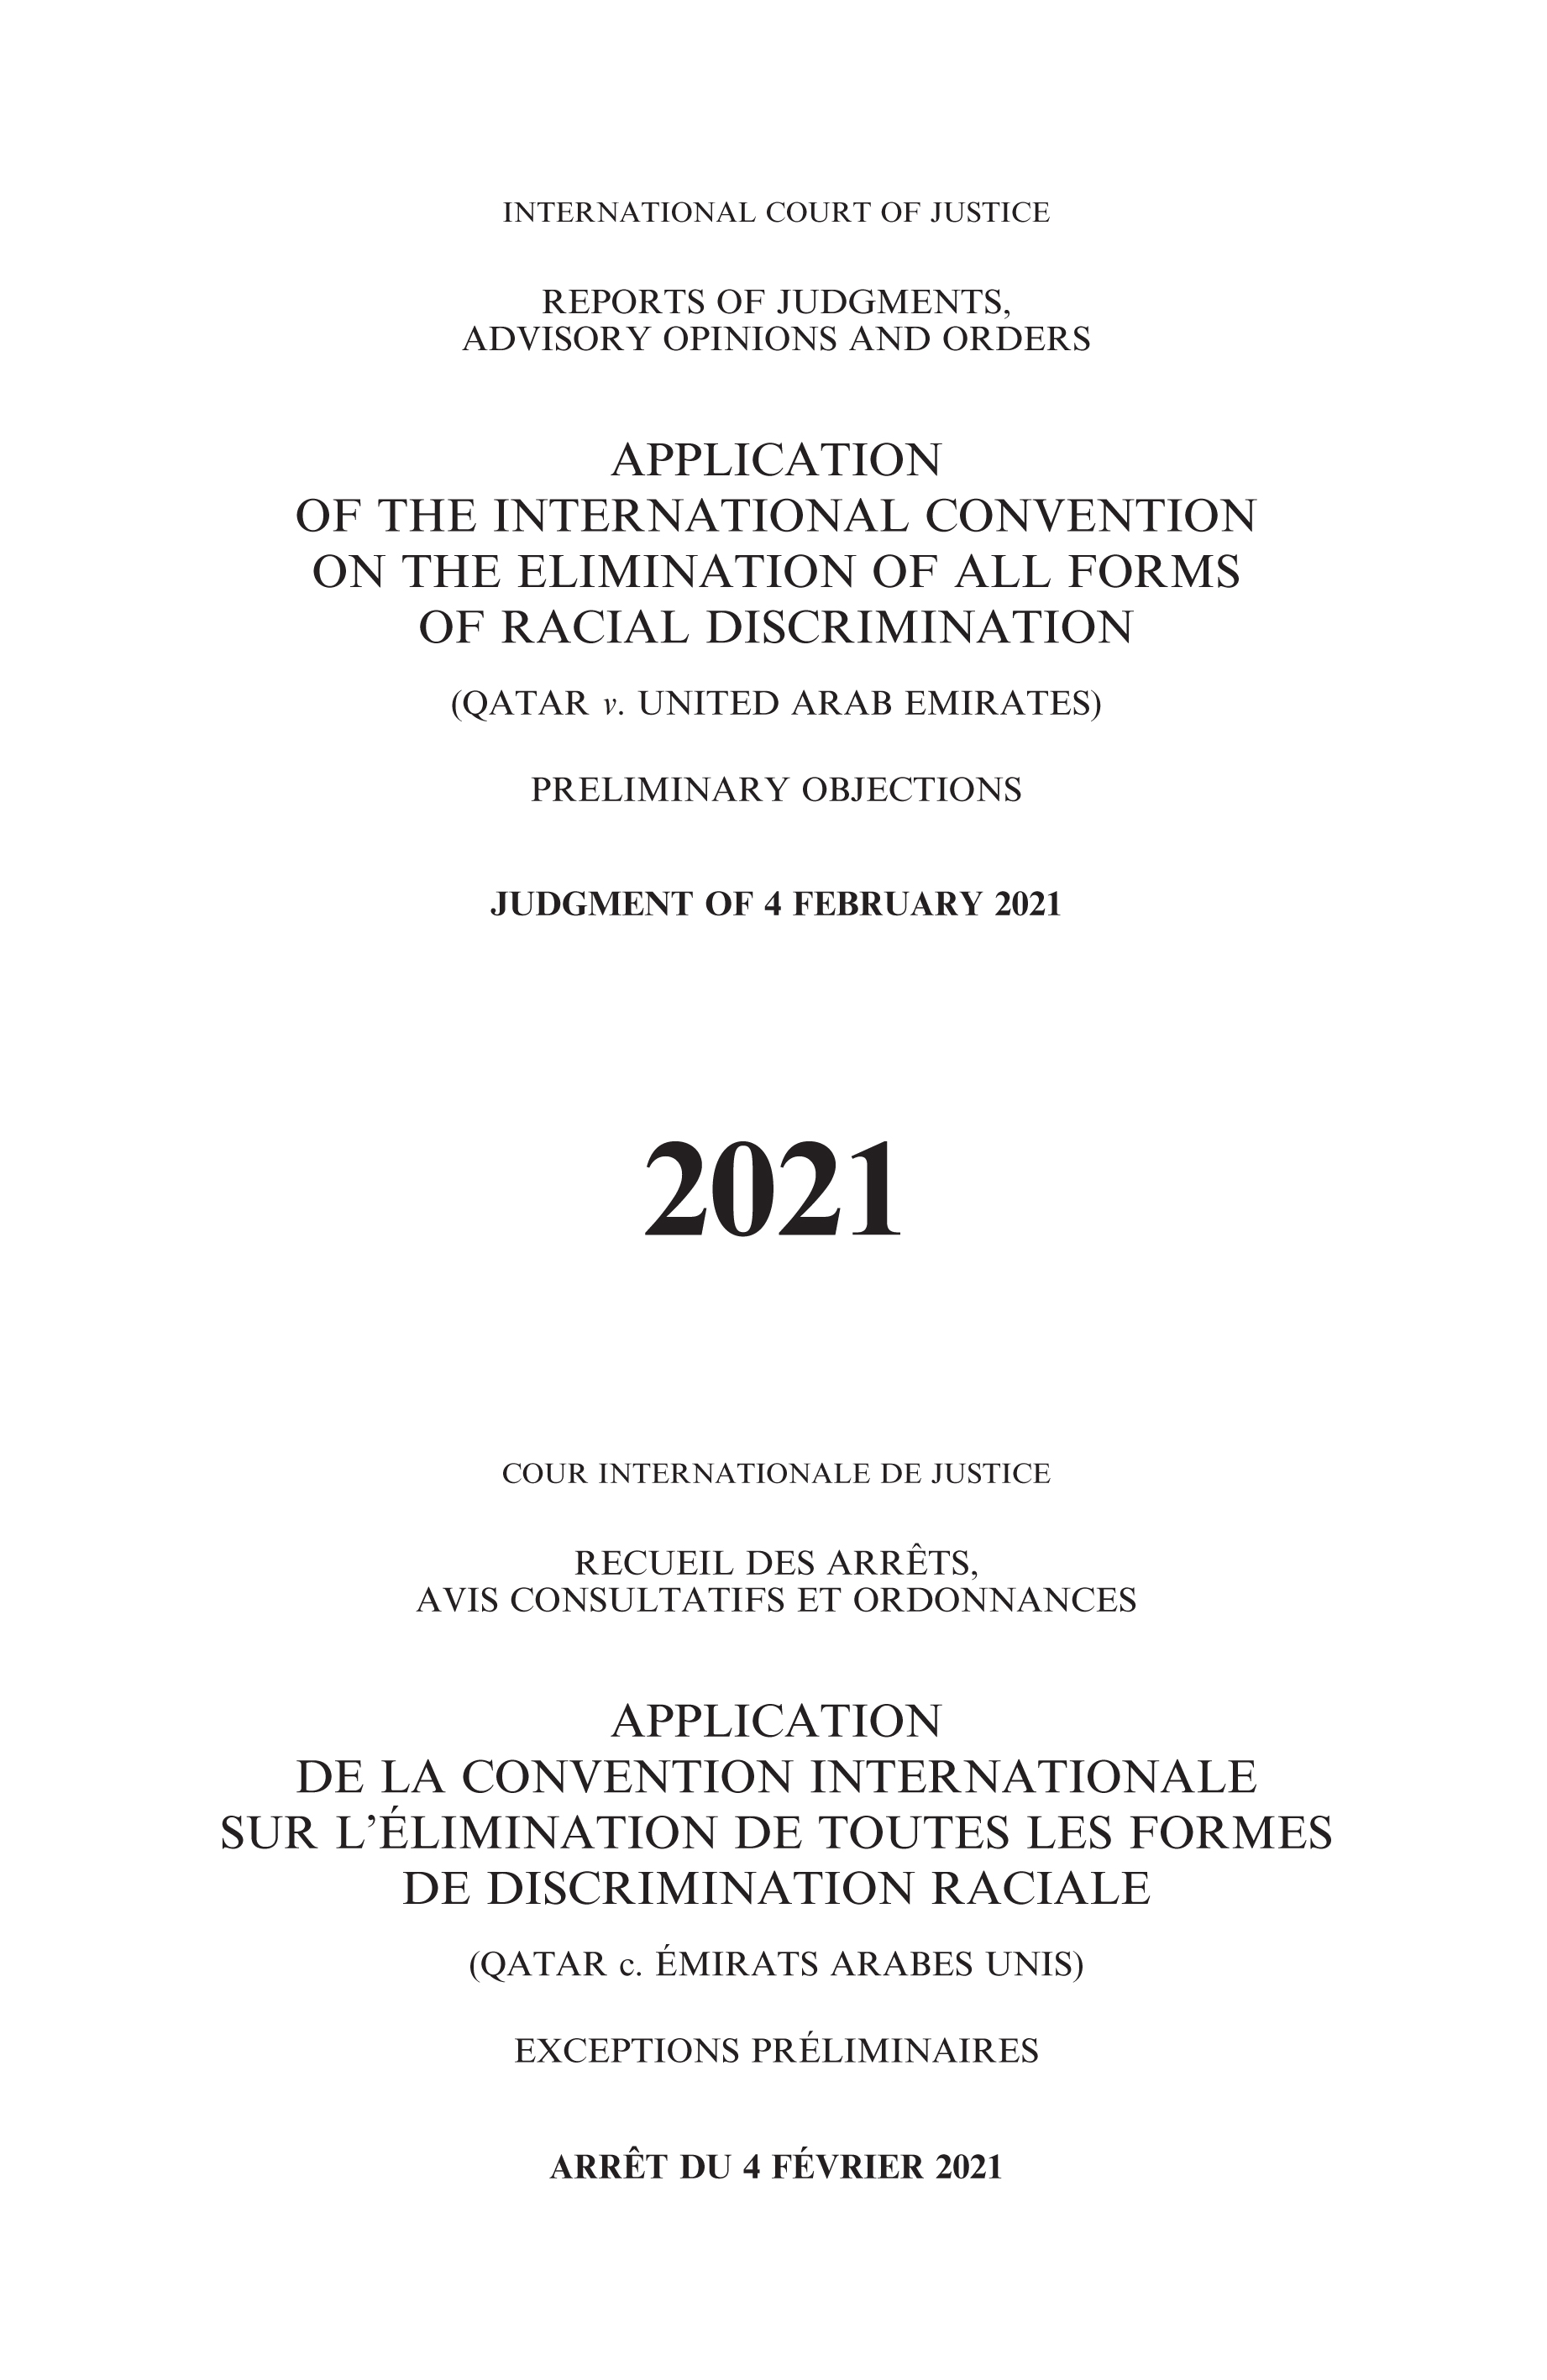 image of Reports of Judgments, Advisory Opinions and Orders 2021: Application of the International Convention on the Elimination of All Forms of Racial Discrimination (Qatar v. United Arab Emirates) Preliminary Objections